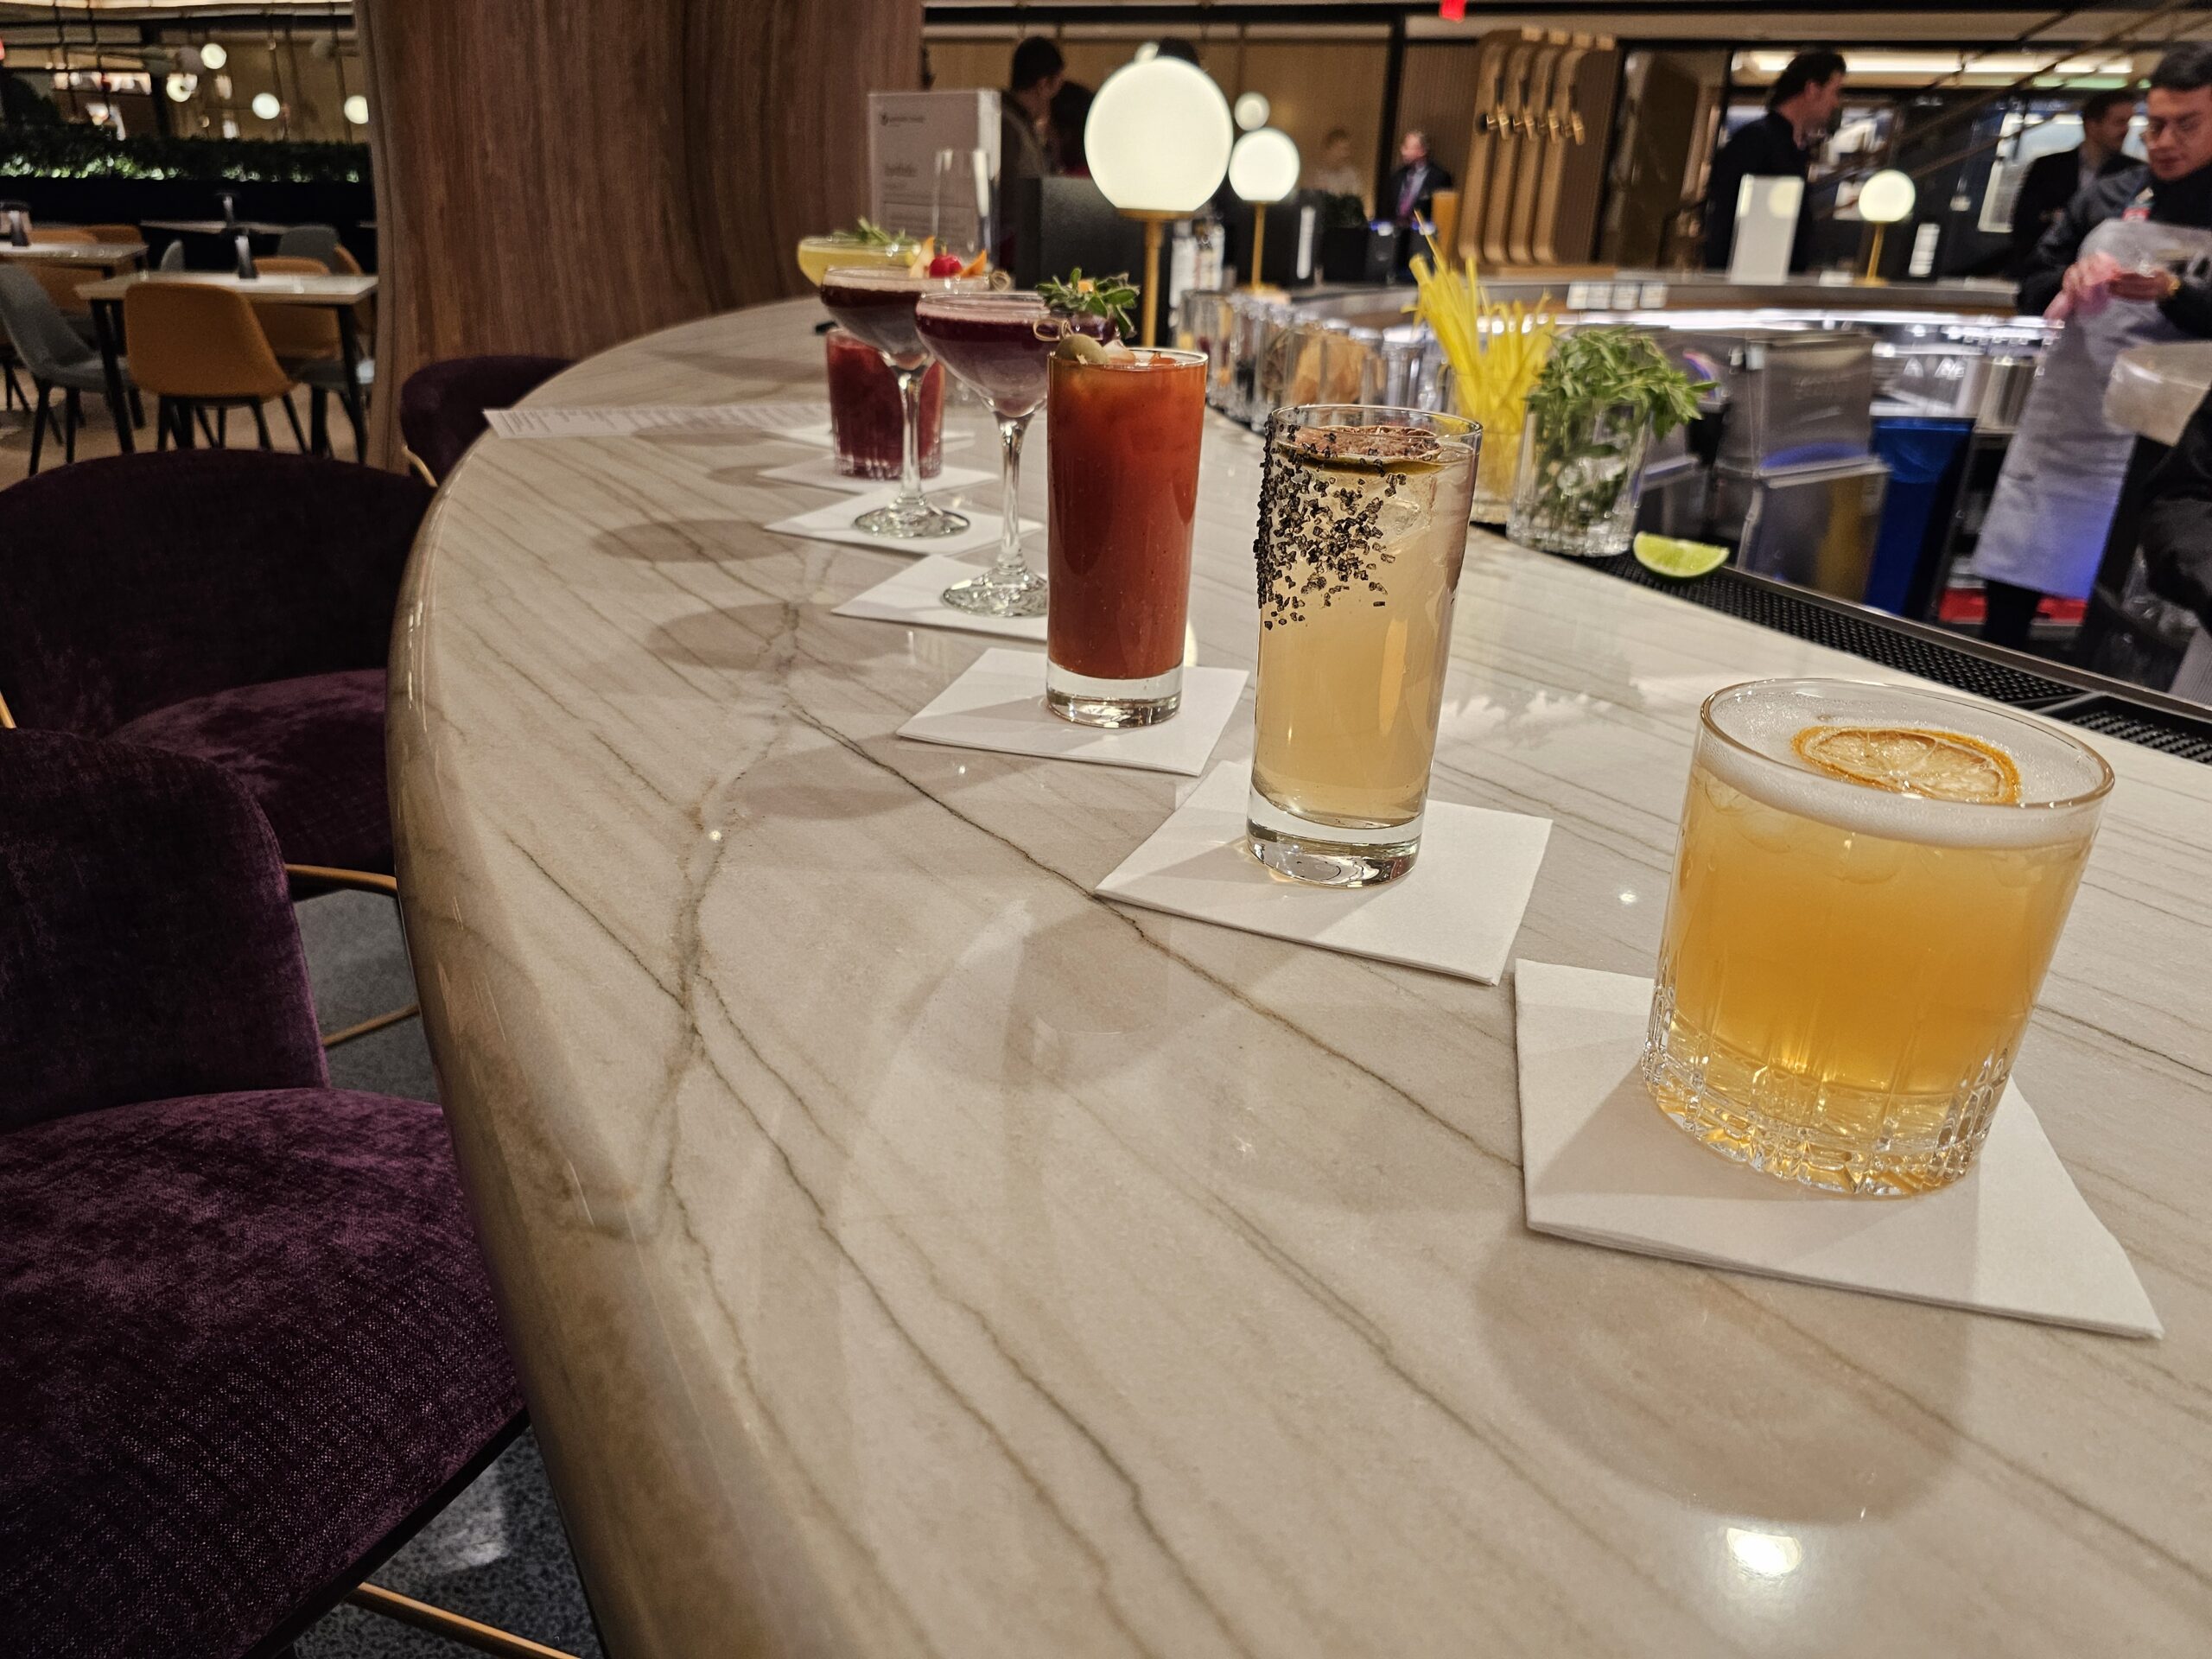 Chase Sapphire Lounge by The Club at LaGuardia Airport cocktails